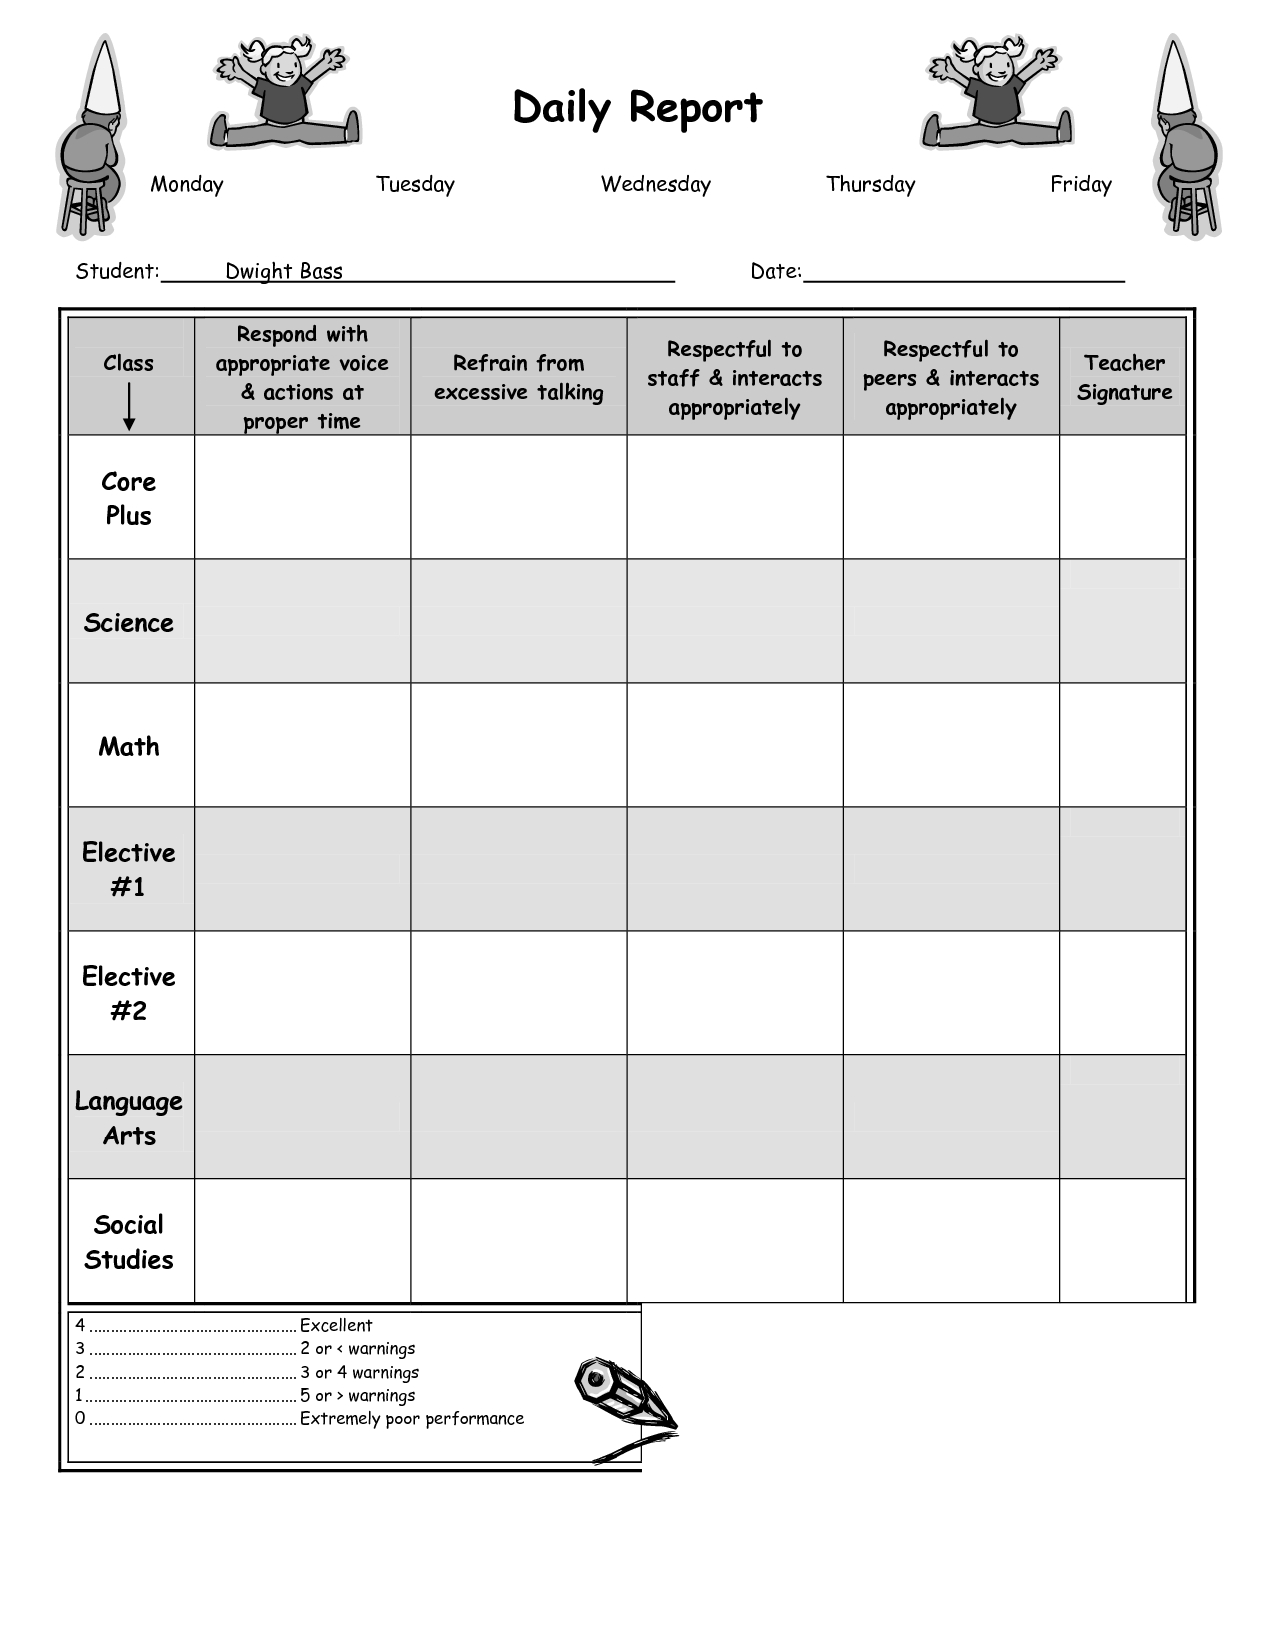 Daily Report Card Template For Adhd ] - Report Template Pertaining To Daily Report Card Template For Adhd